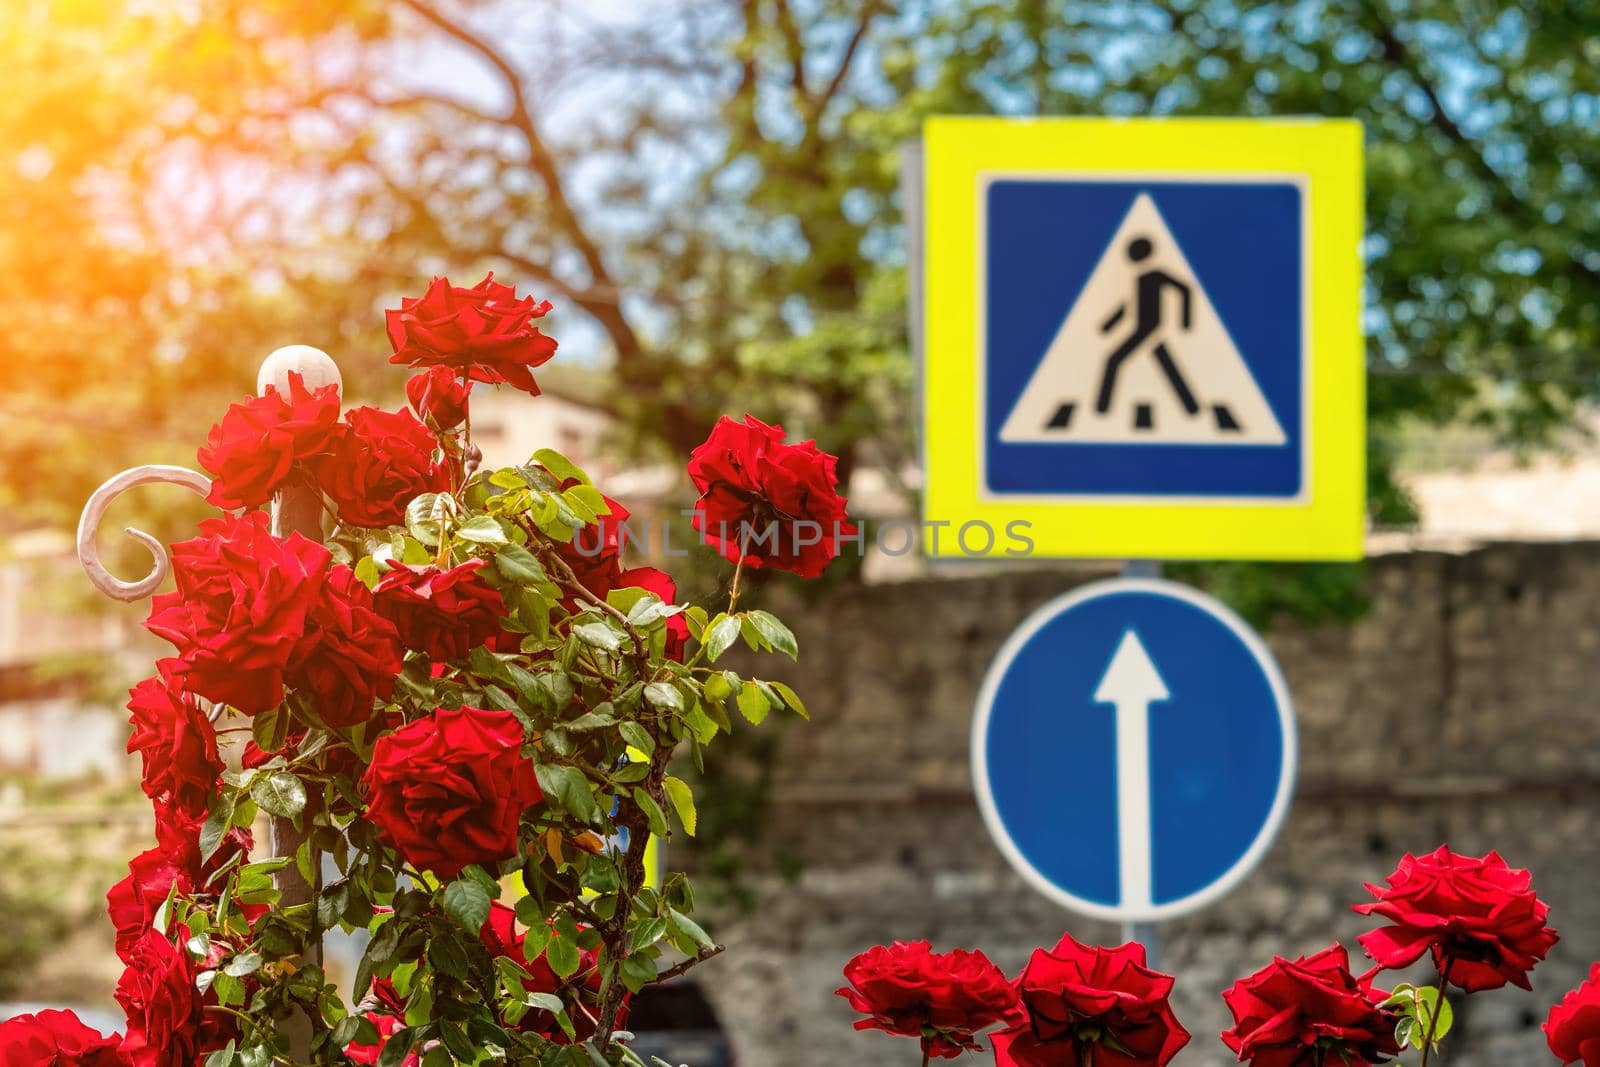 Red rose bush and road signs on the background.